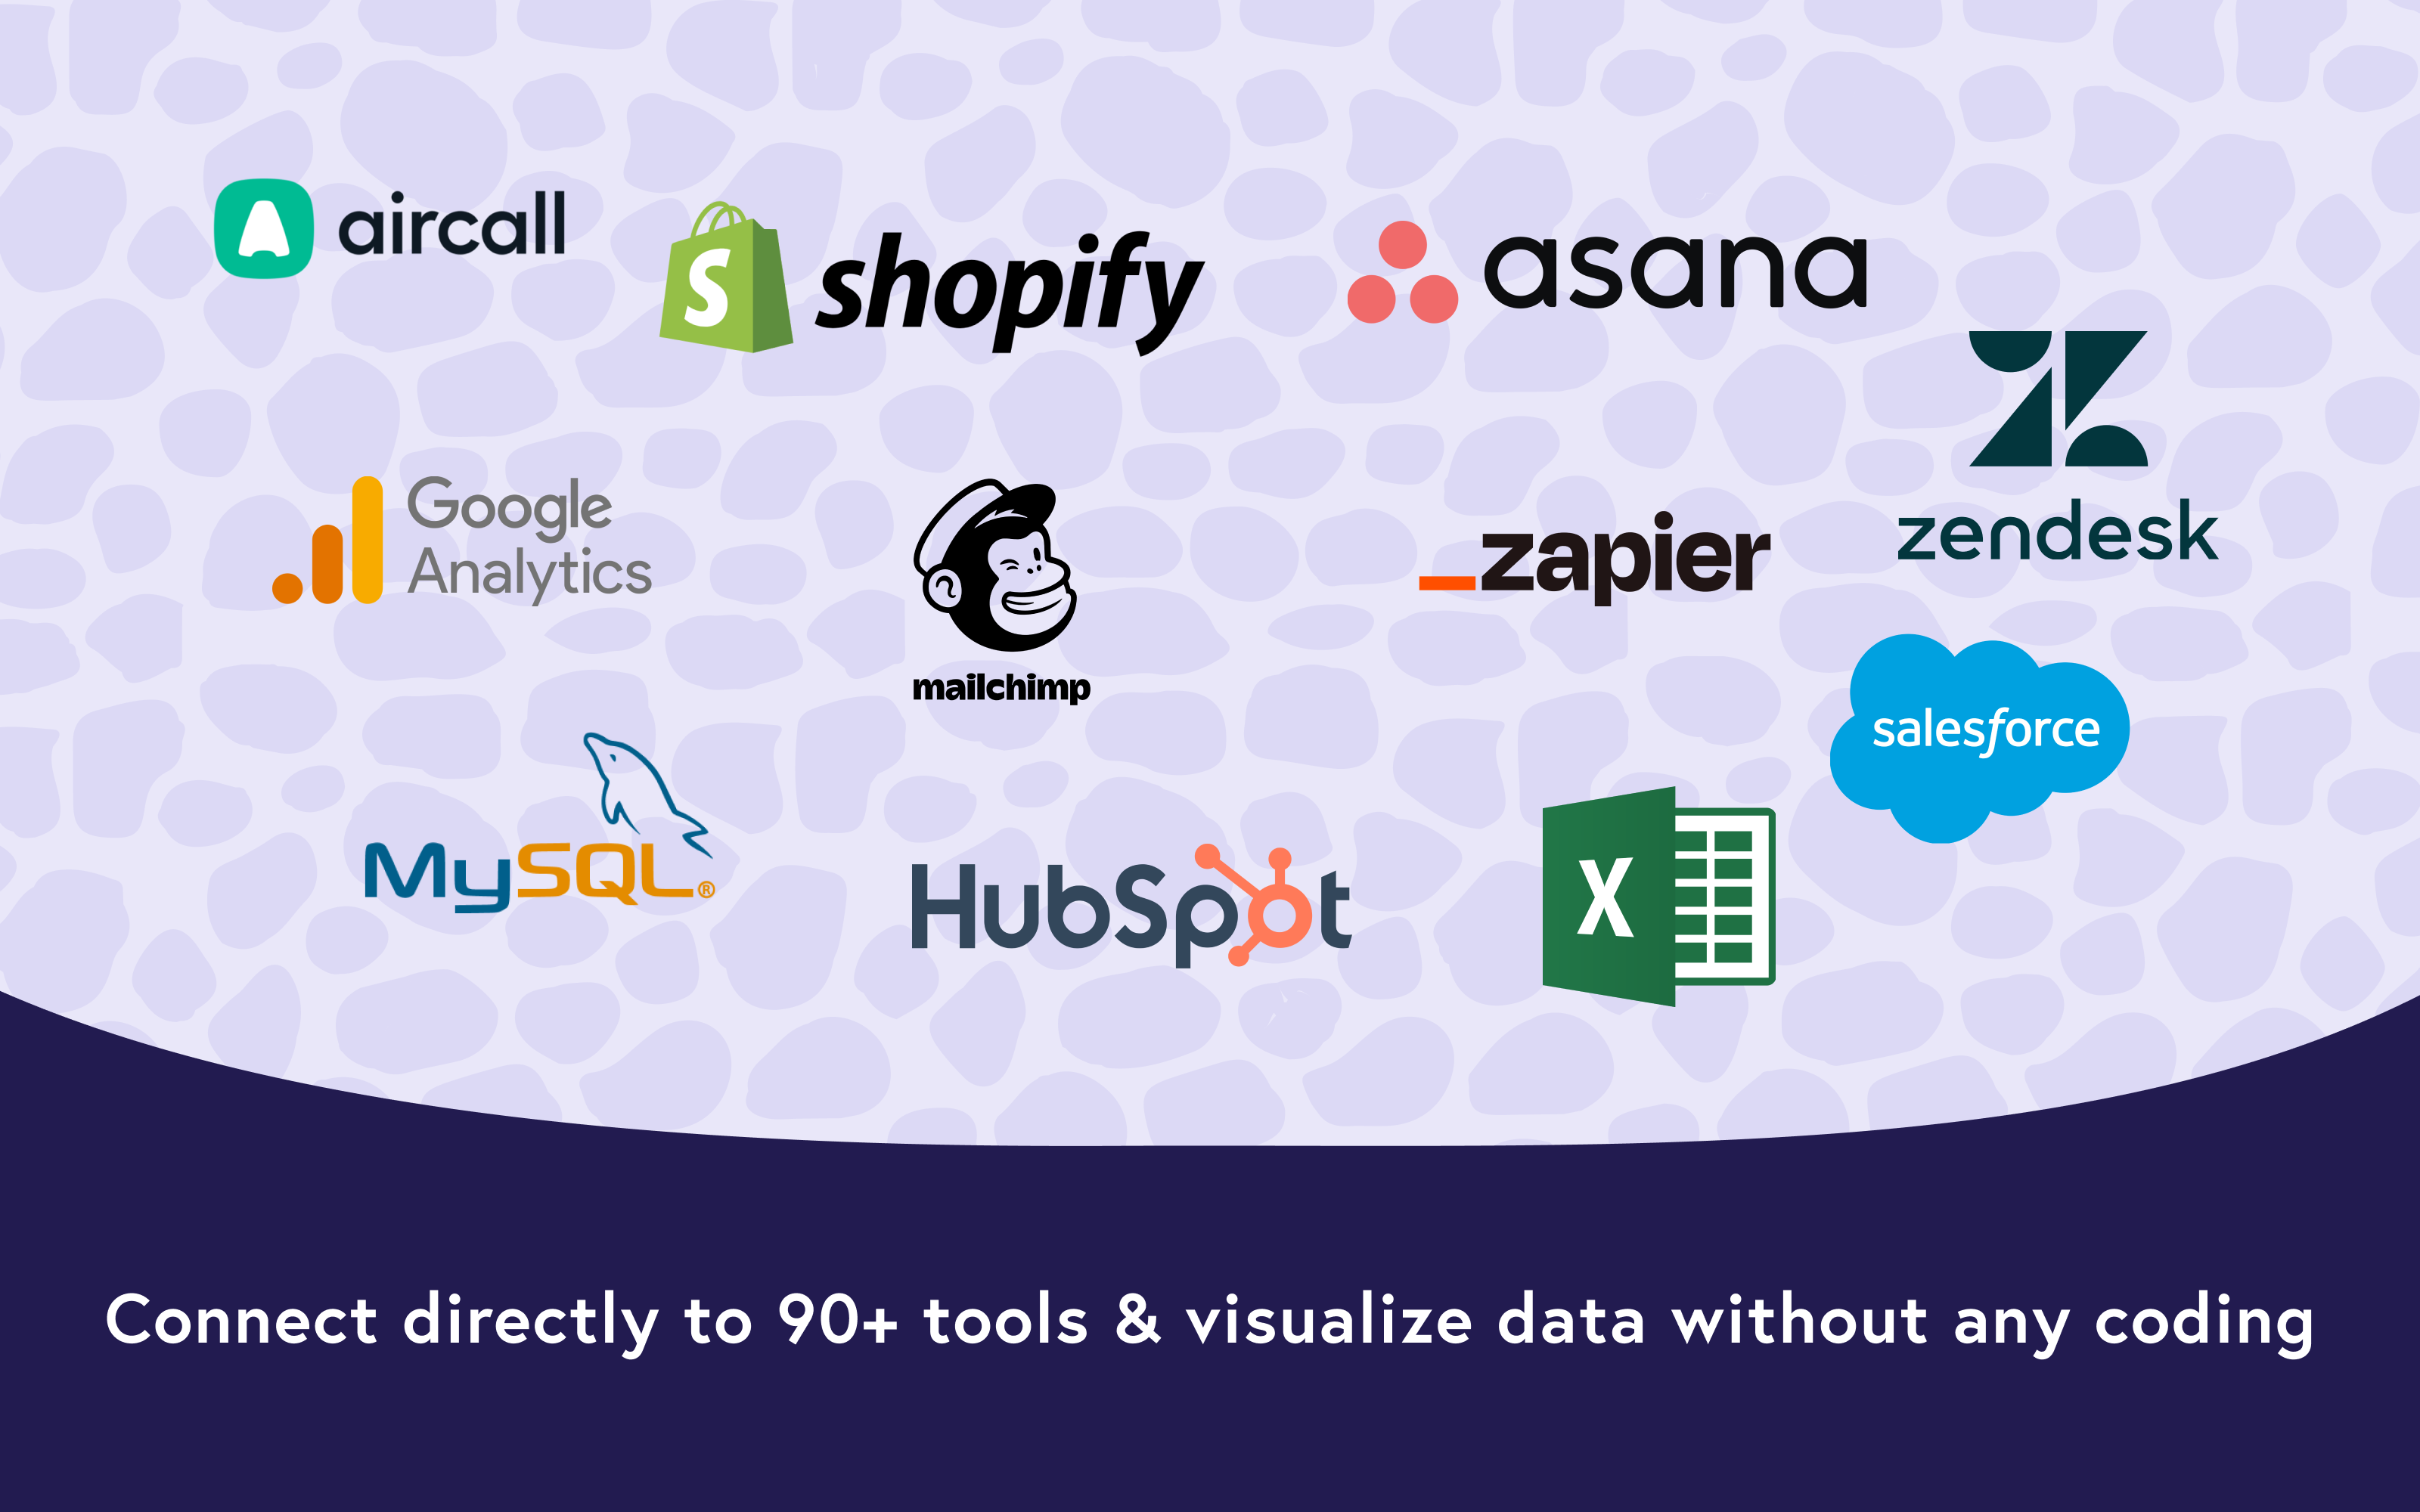 Connect directly to 90+ tools & visualize data without any coding